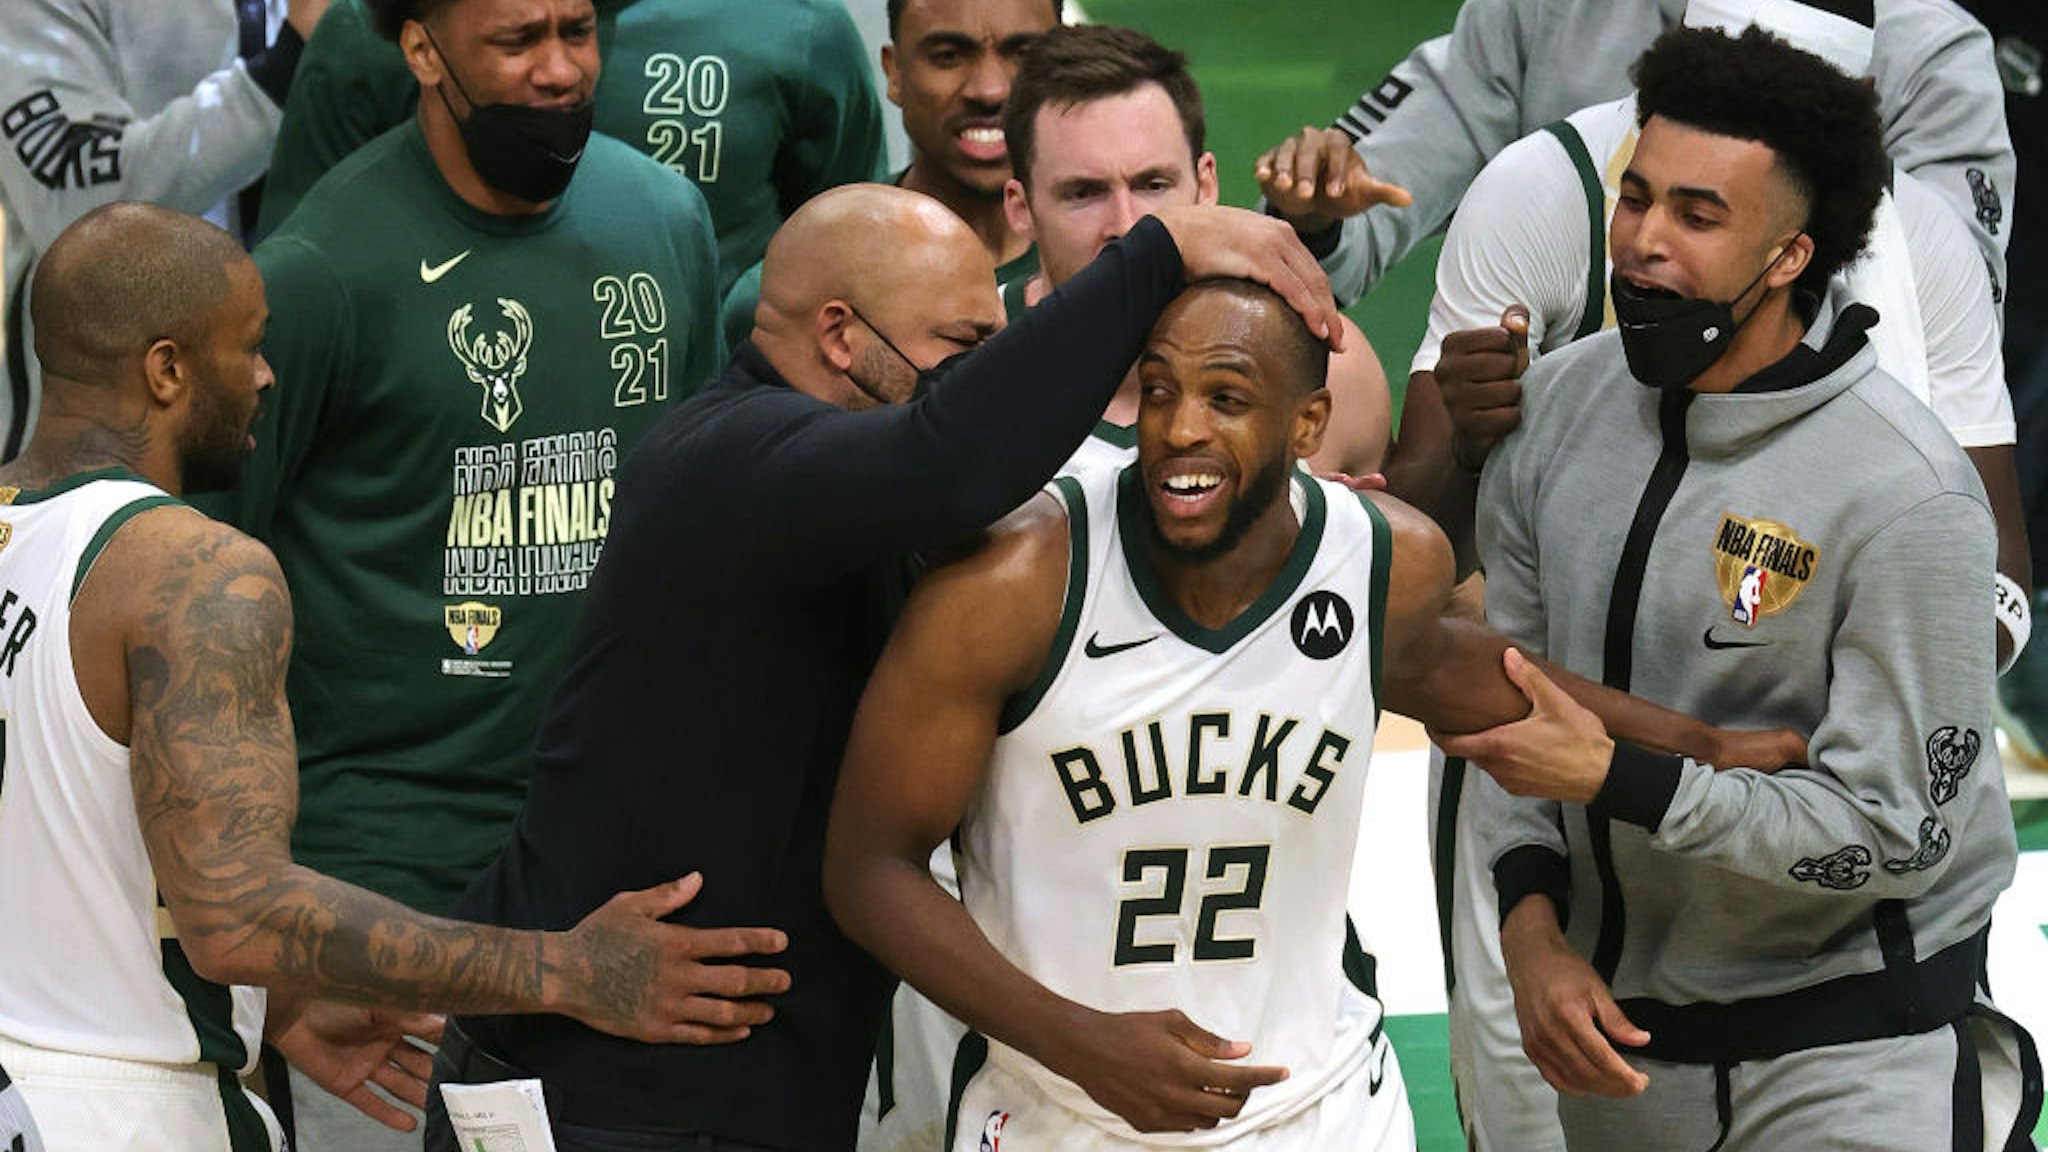 MILWAUKEE, WISCONSIN - JULY 14: Khris Middleton #22 of the Milwaukee Bucks is congratulated by teammates during the second half in Game Four of the NBA Finals against the Phoenix Suns at Fiserv Forum on July 14, 2021 in Milwaukee, Wisconsin. NOTE TO USER: User expressly acknowledges and agrees that, by downloading and or using this photograph, User is consenting to the terms and conditions of the Getty Images License Agreement. (Photo by Jonathan Daniel/Getty Images)